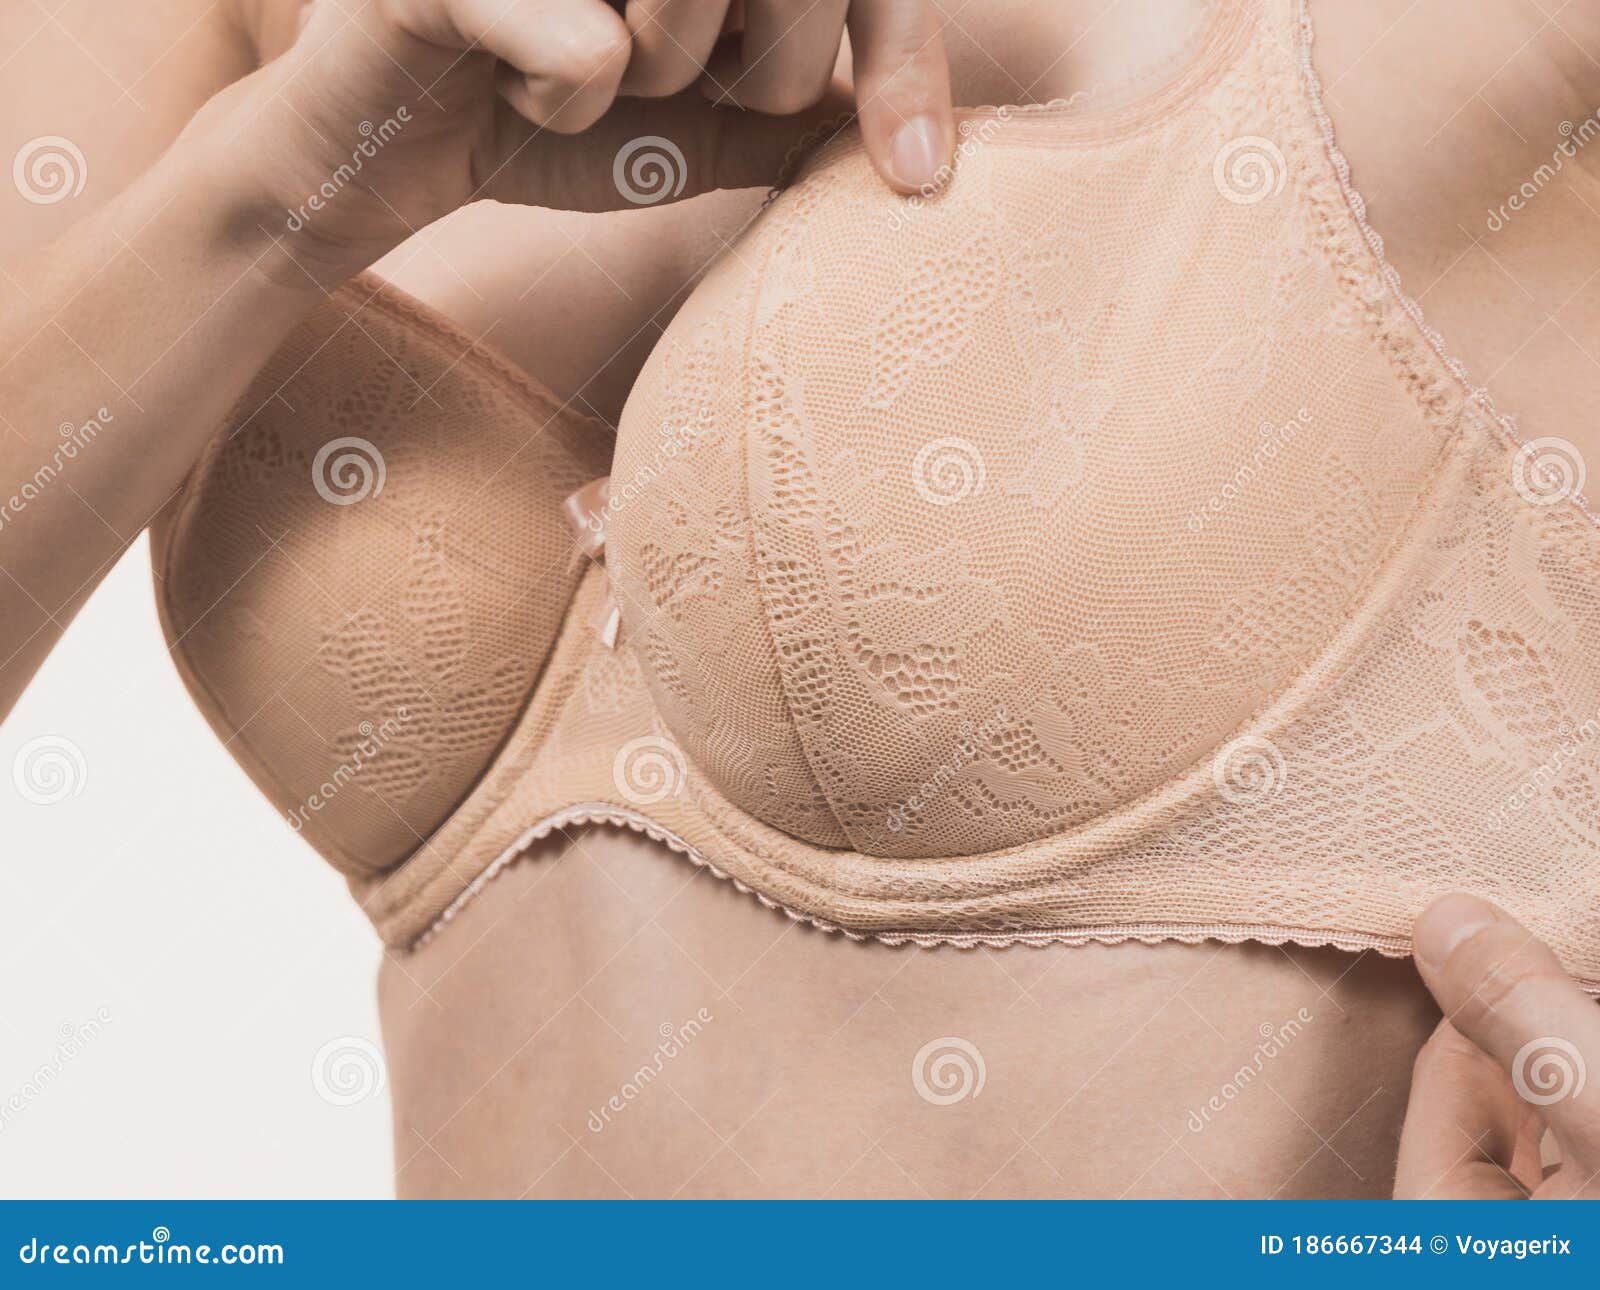 Young Woman Small Boobs Wearing Bra Give Thumb Down Sign. Girl Dissatisfied  With Size Of Breasts. Bosom, Brafitting And Underwear Concept. Stock Photo,  Picture and Royalty Free Image. Image 186468687.